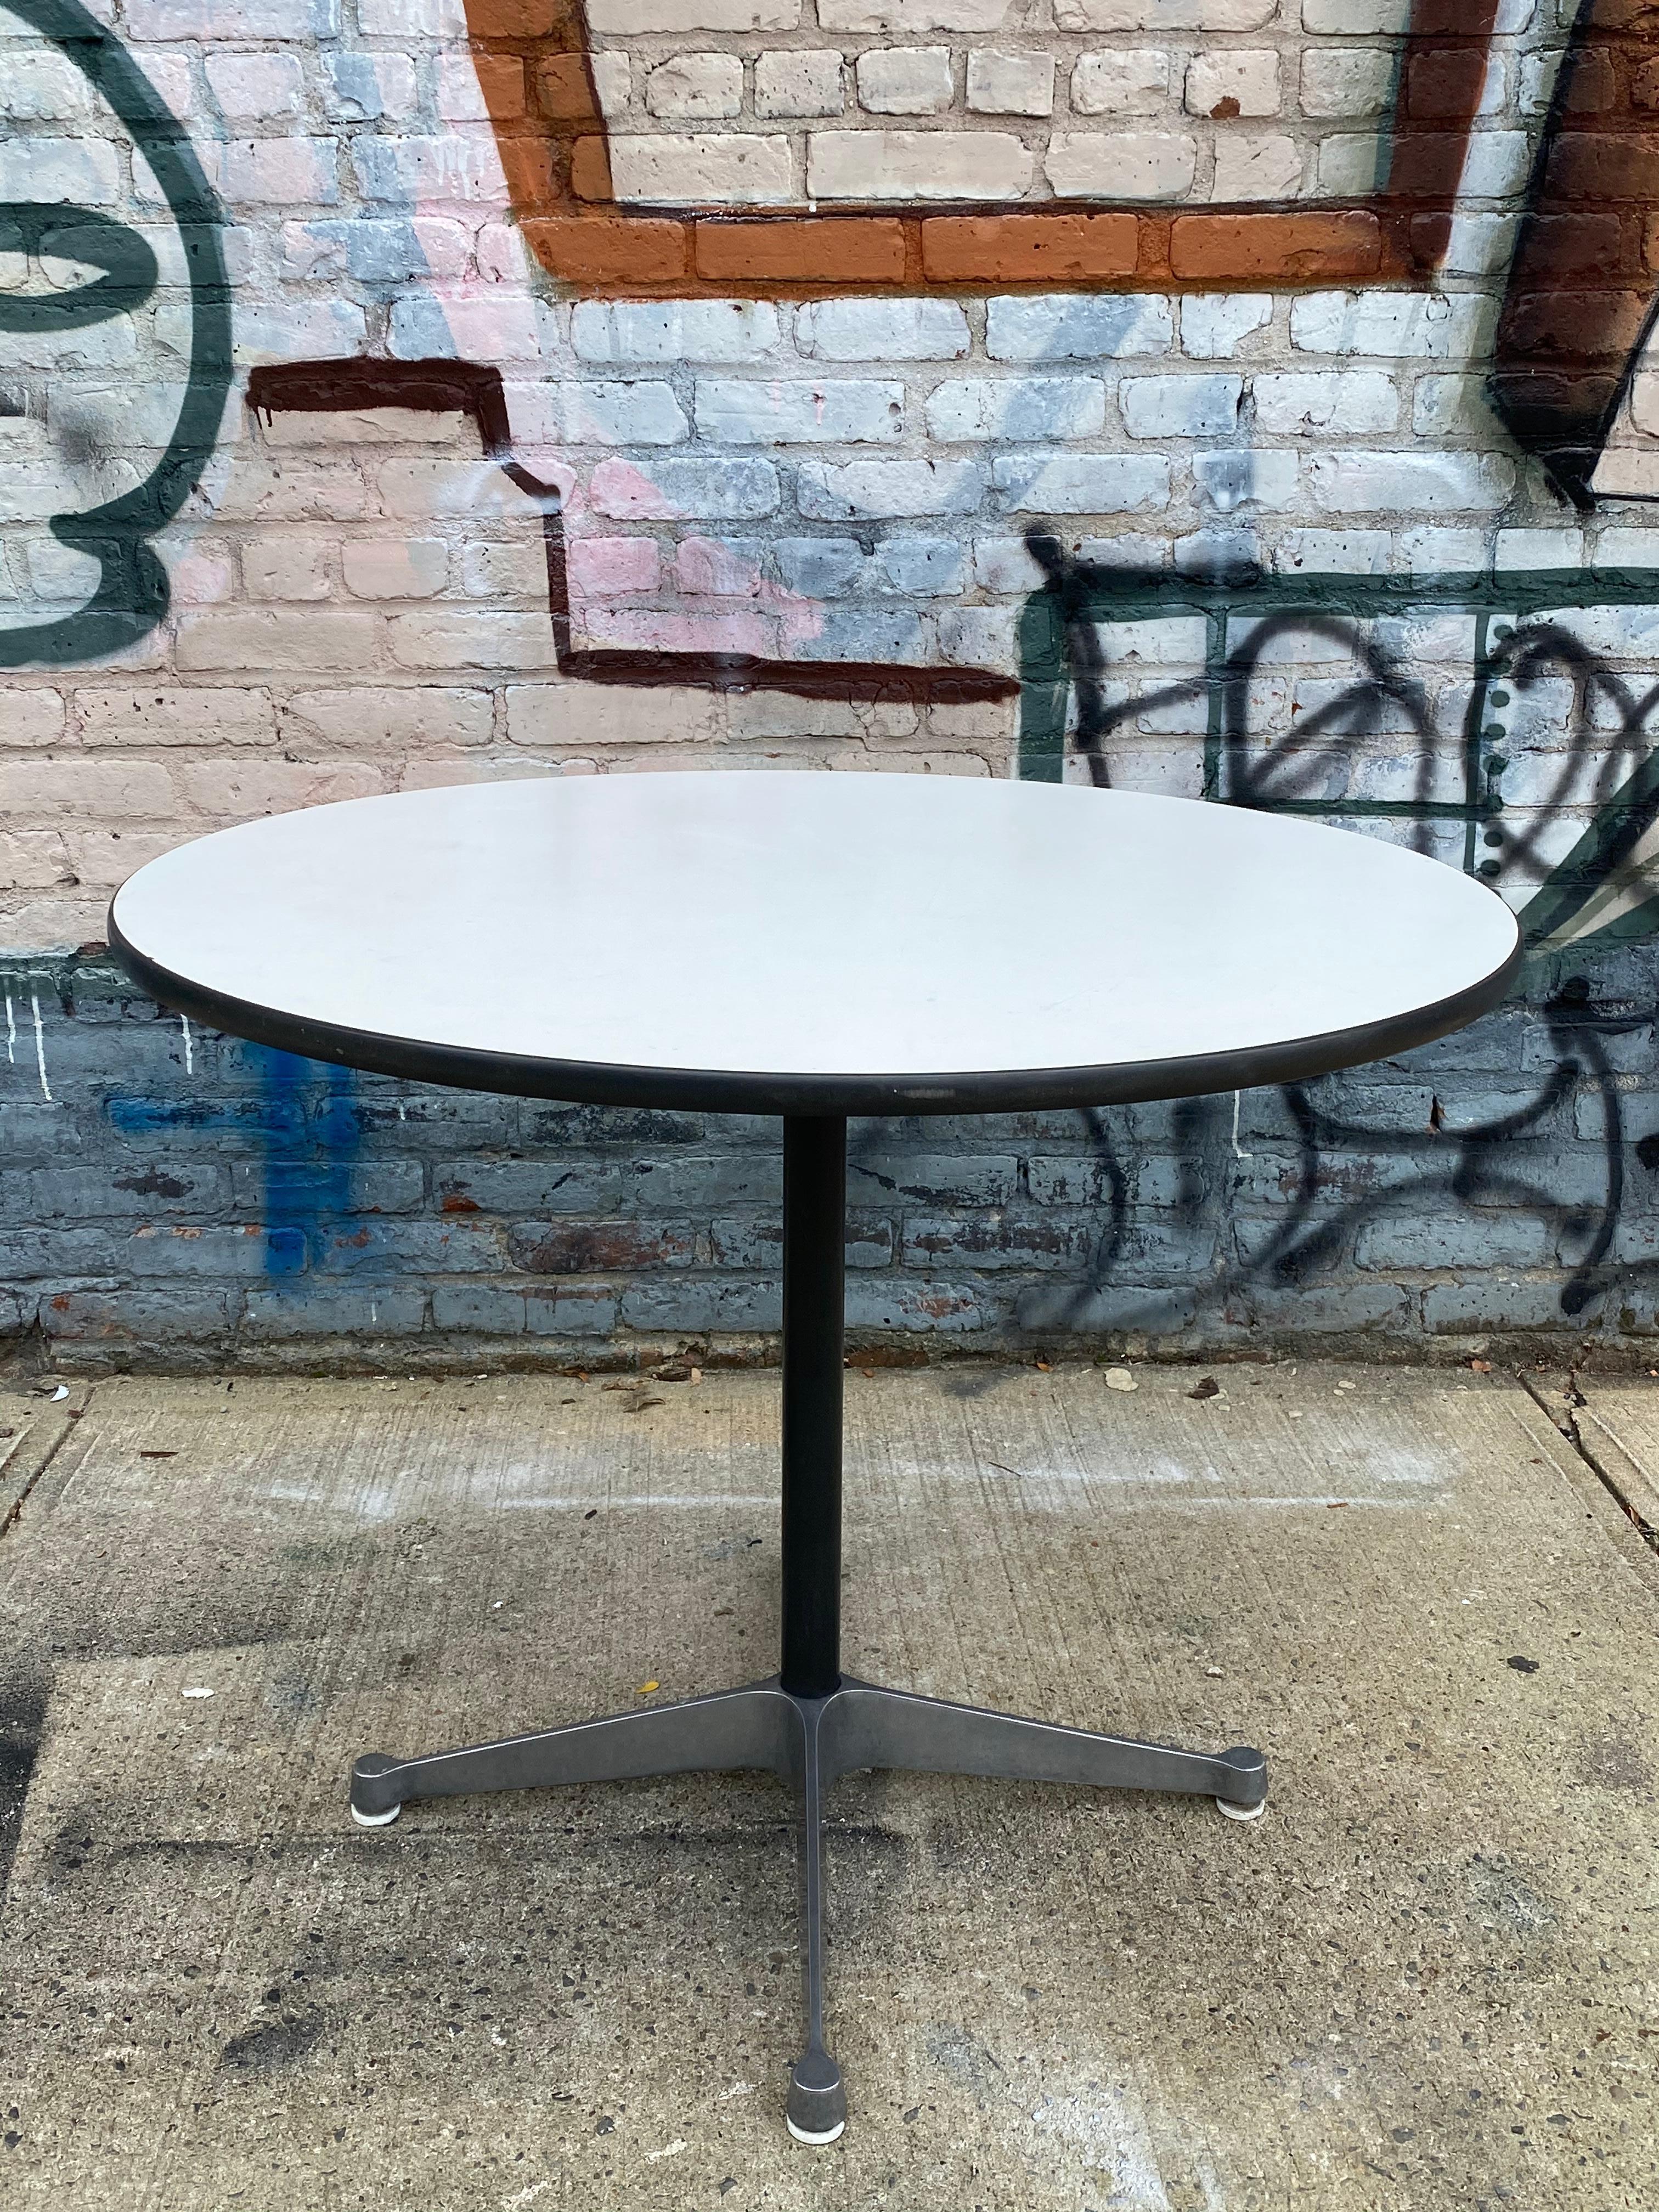 Wonderful example of the Classic Eames dining table for Herman Miller. 36 inch diameter with durable laminate top. Signed and guaranteed authentic. Great for up to 4 people. On sturdy Herman Miller contract aluminum four star base. Pair of Eames